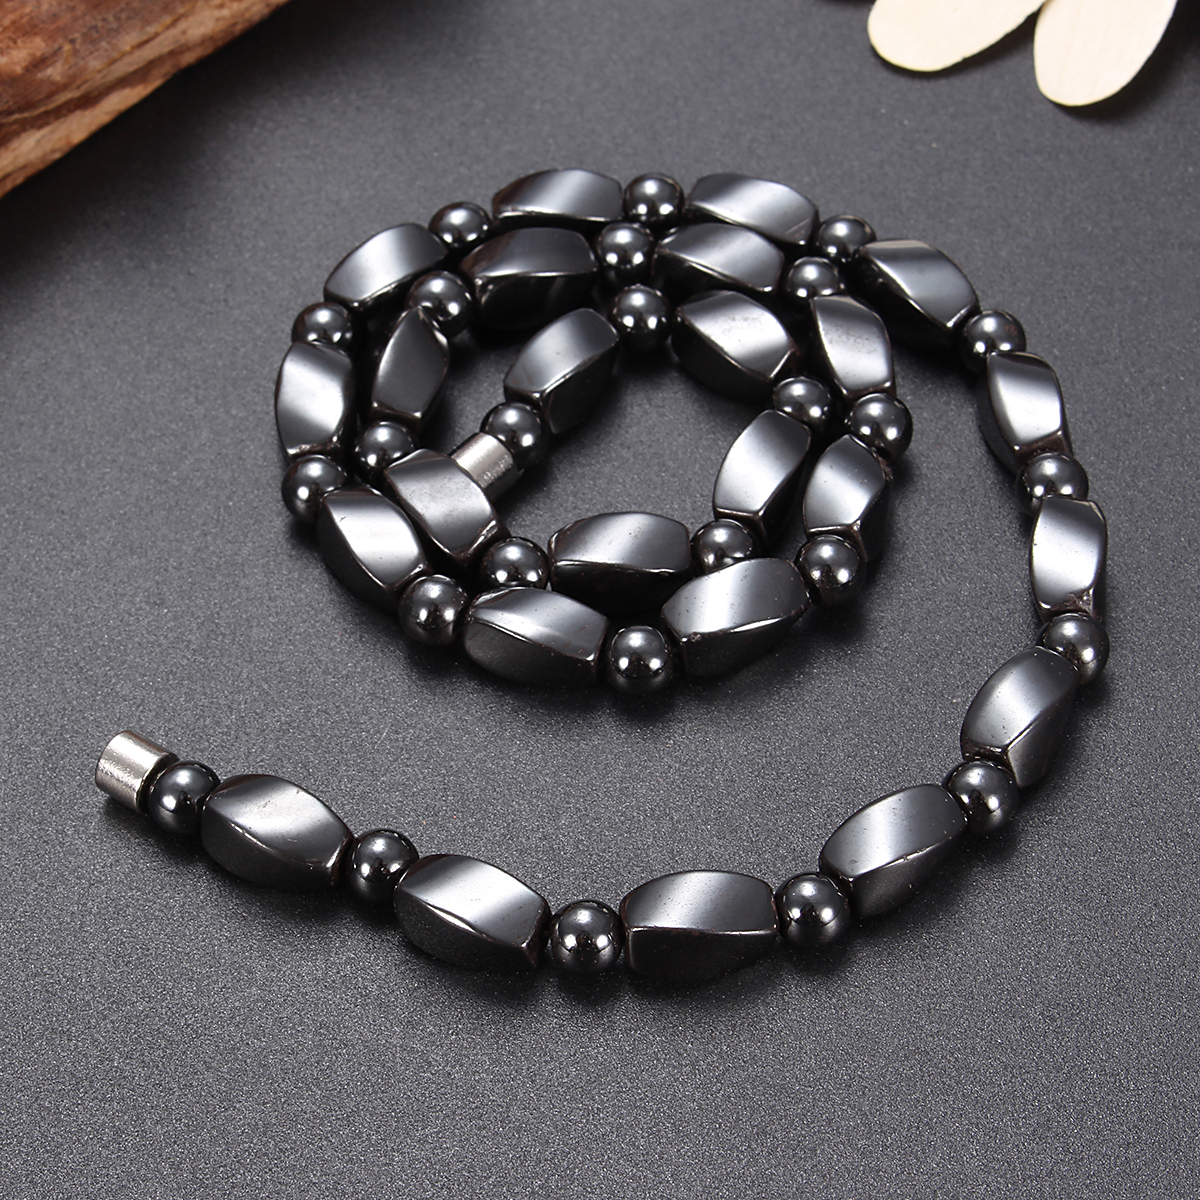 Anti-Fatigue-Magnetic-Health-Care-Necklace-Magnet-Chain-Jewelry-Men-Women-Gift-1131004